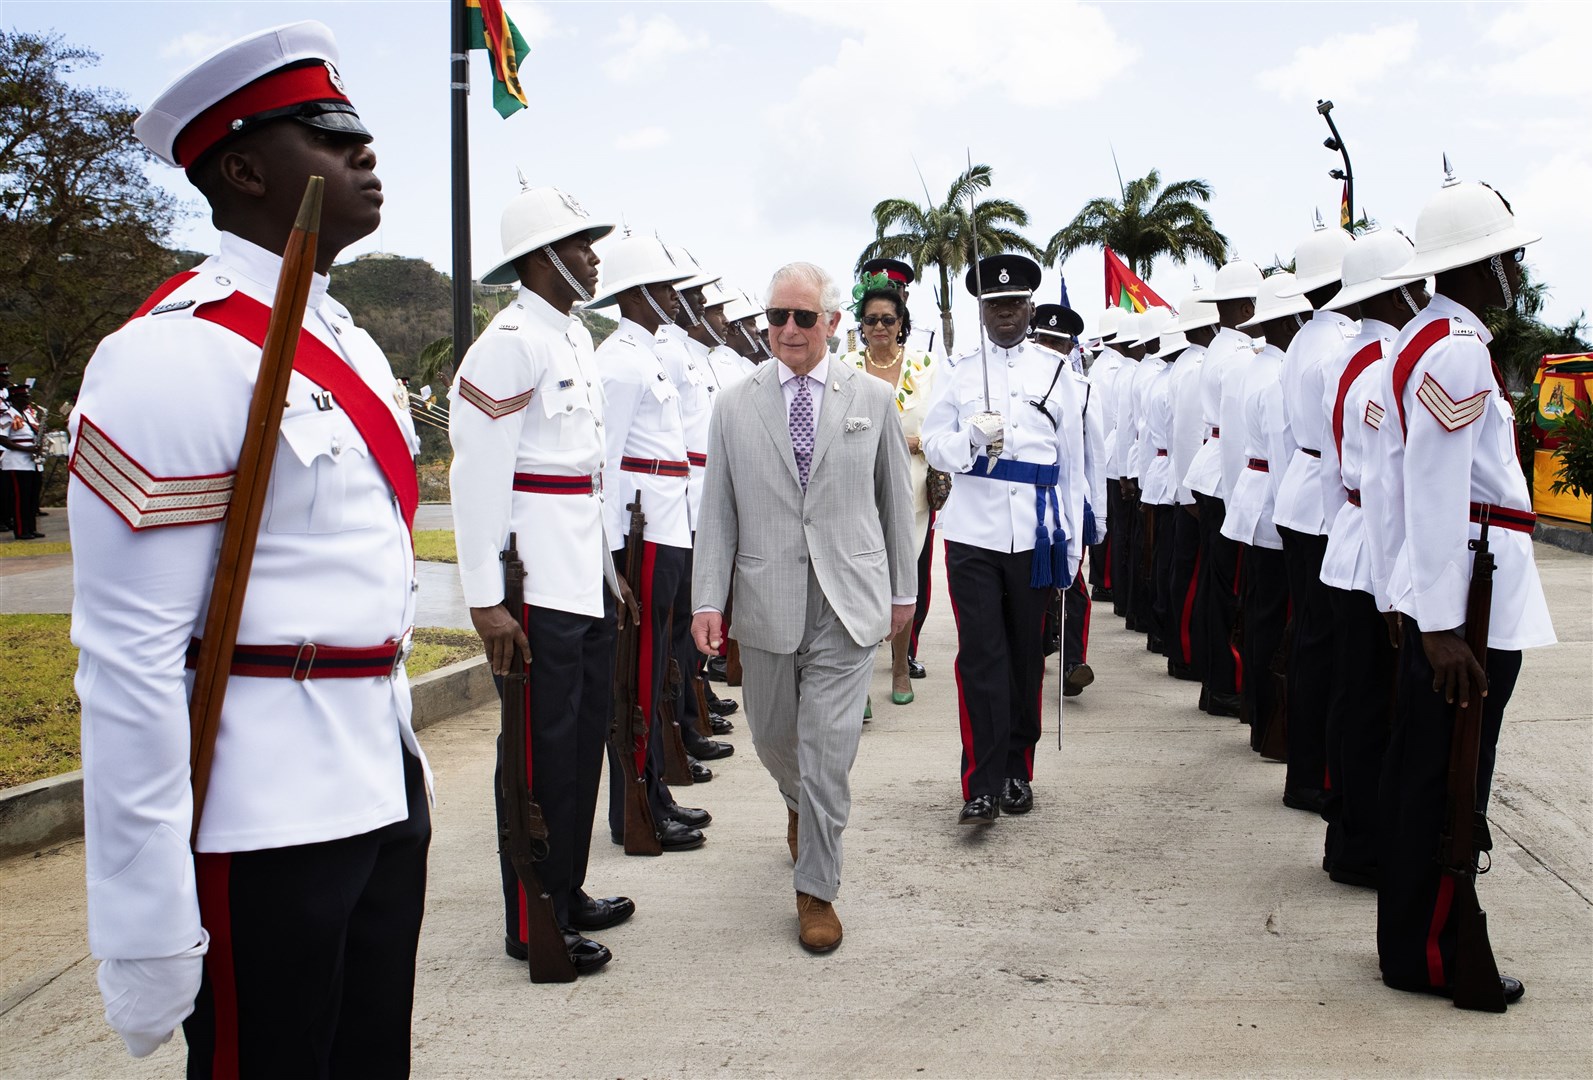 The then Prince of Wales inspects the troops during a welcome ceremony and reception at the Grenada Houses of Parliament building during a visit to the Caribbean island in 2019 (Jane Barlow/PA)